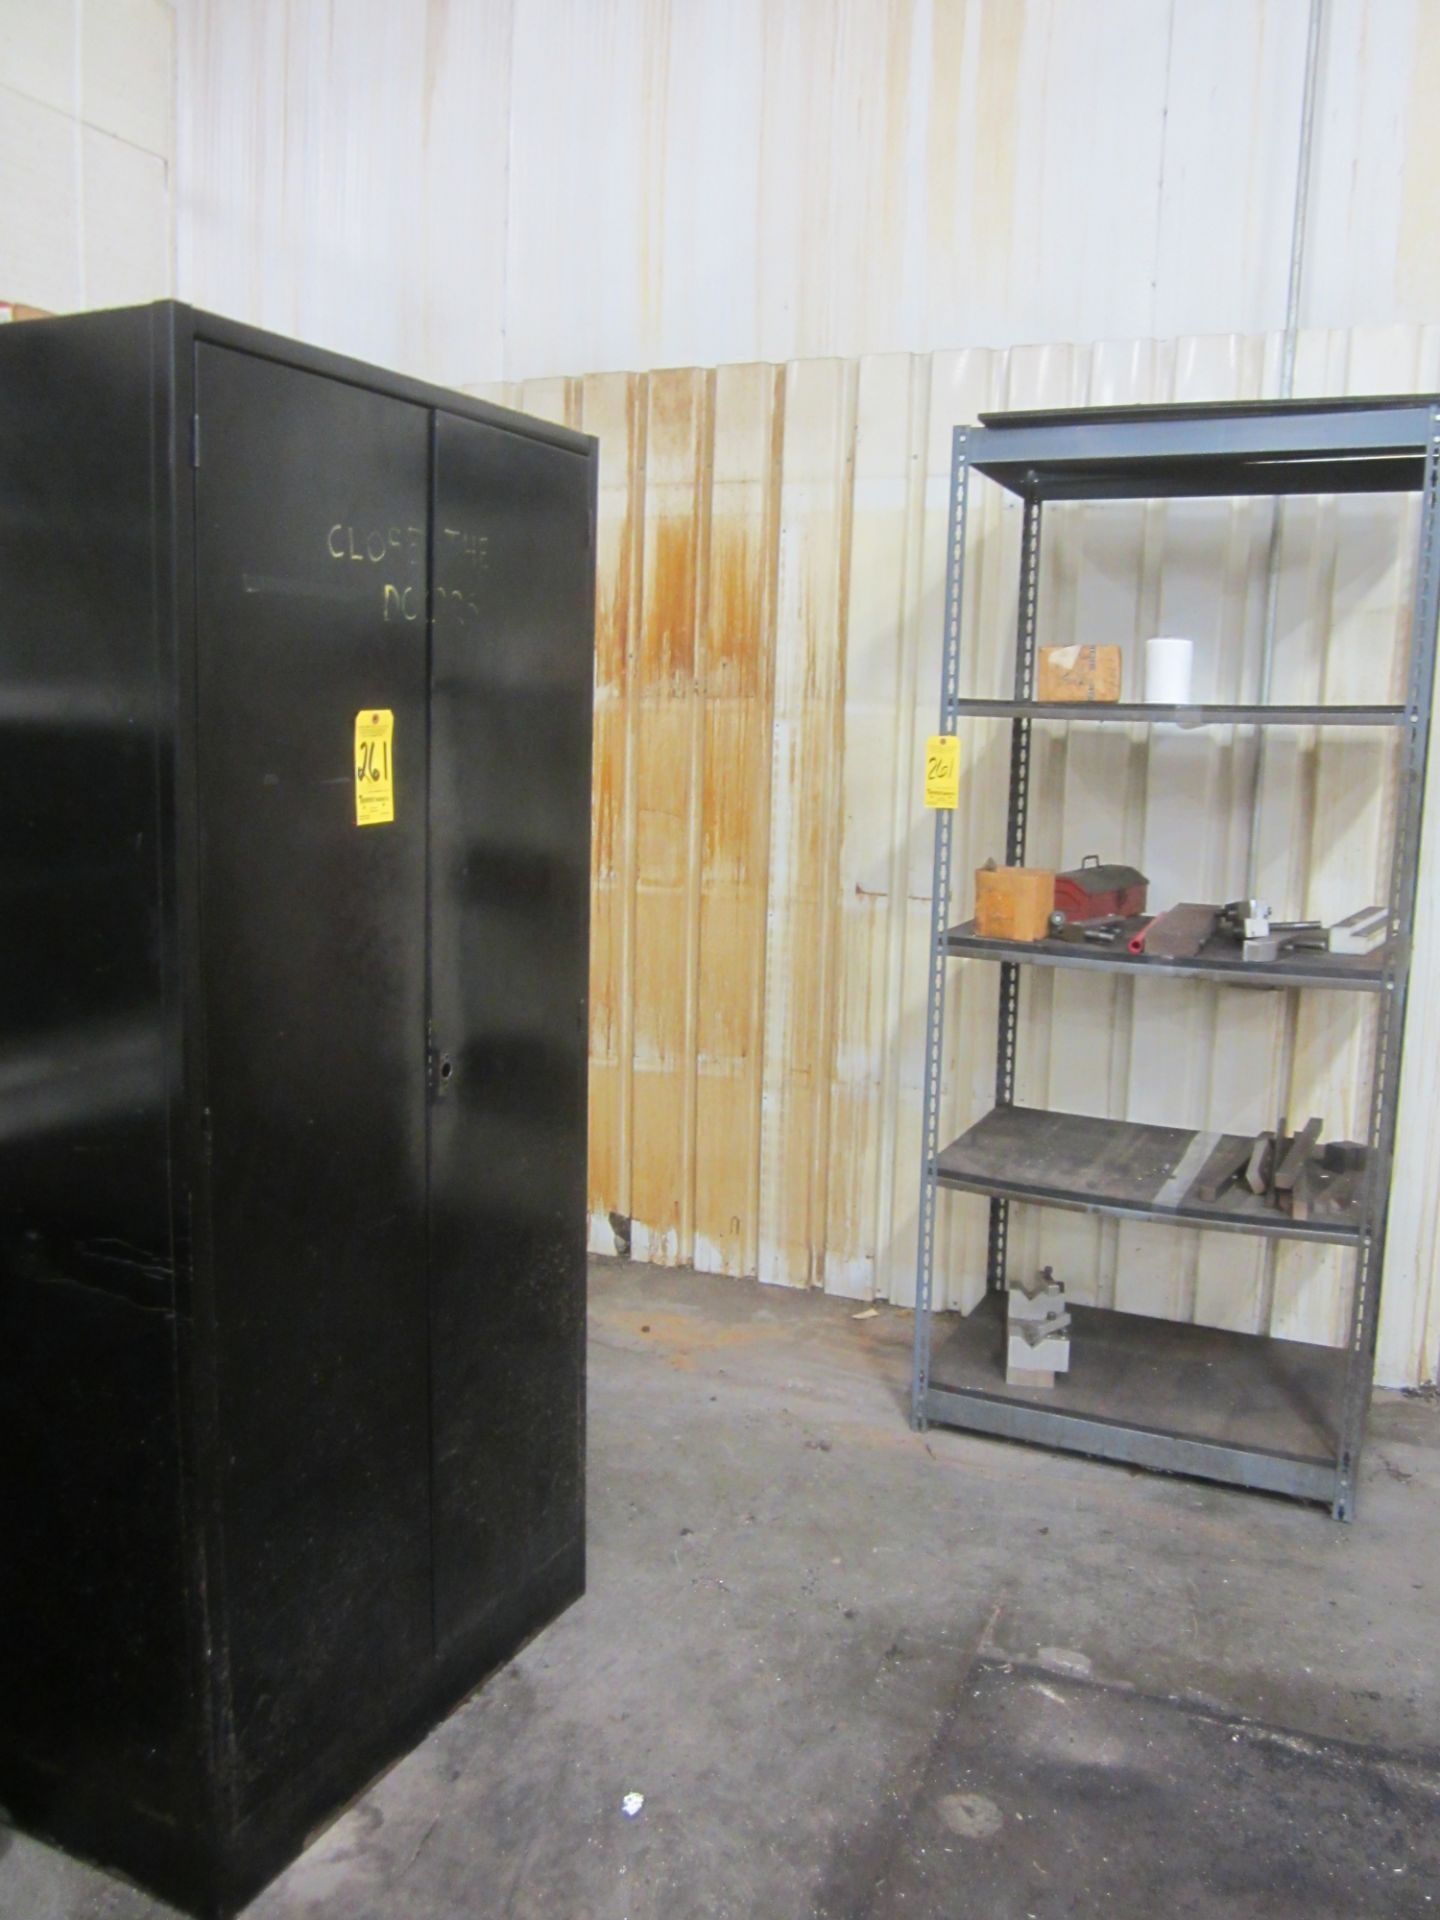 2-Door Metal Upright Storage Cabinet, and Shelving Unit